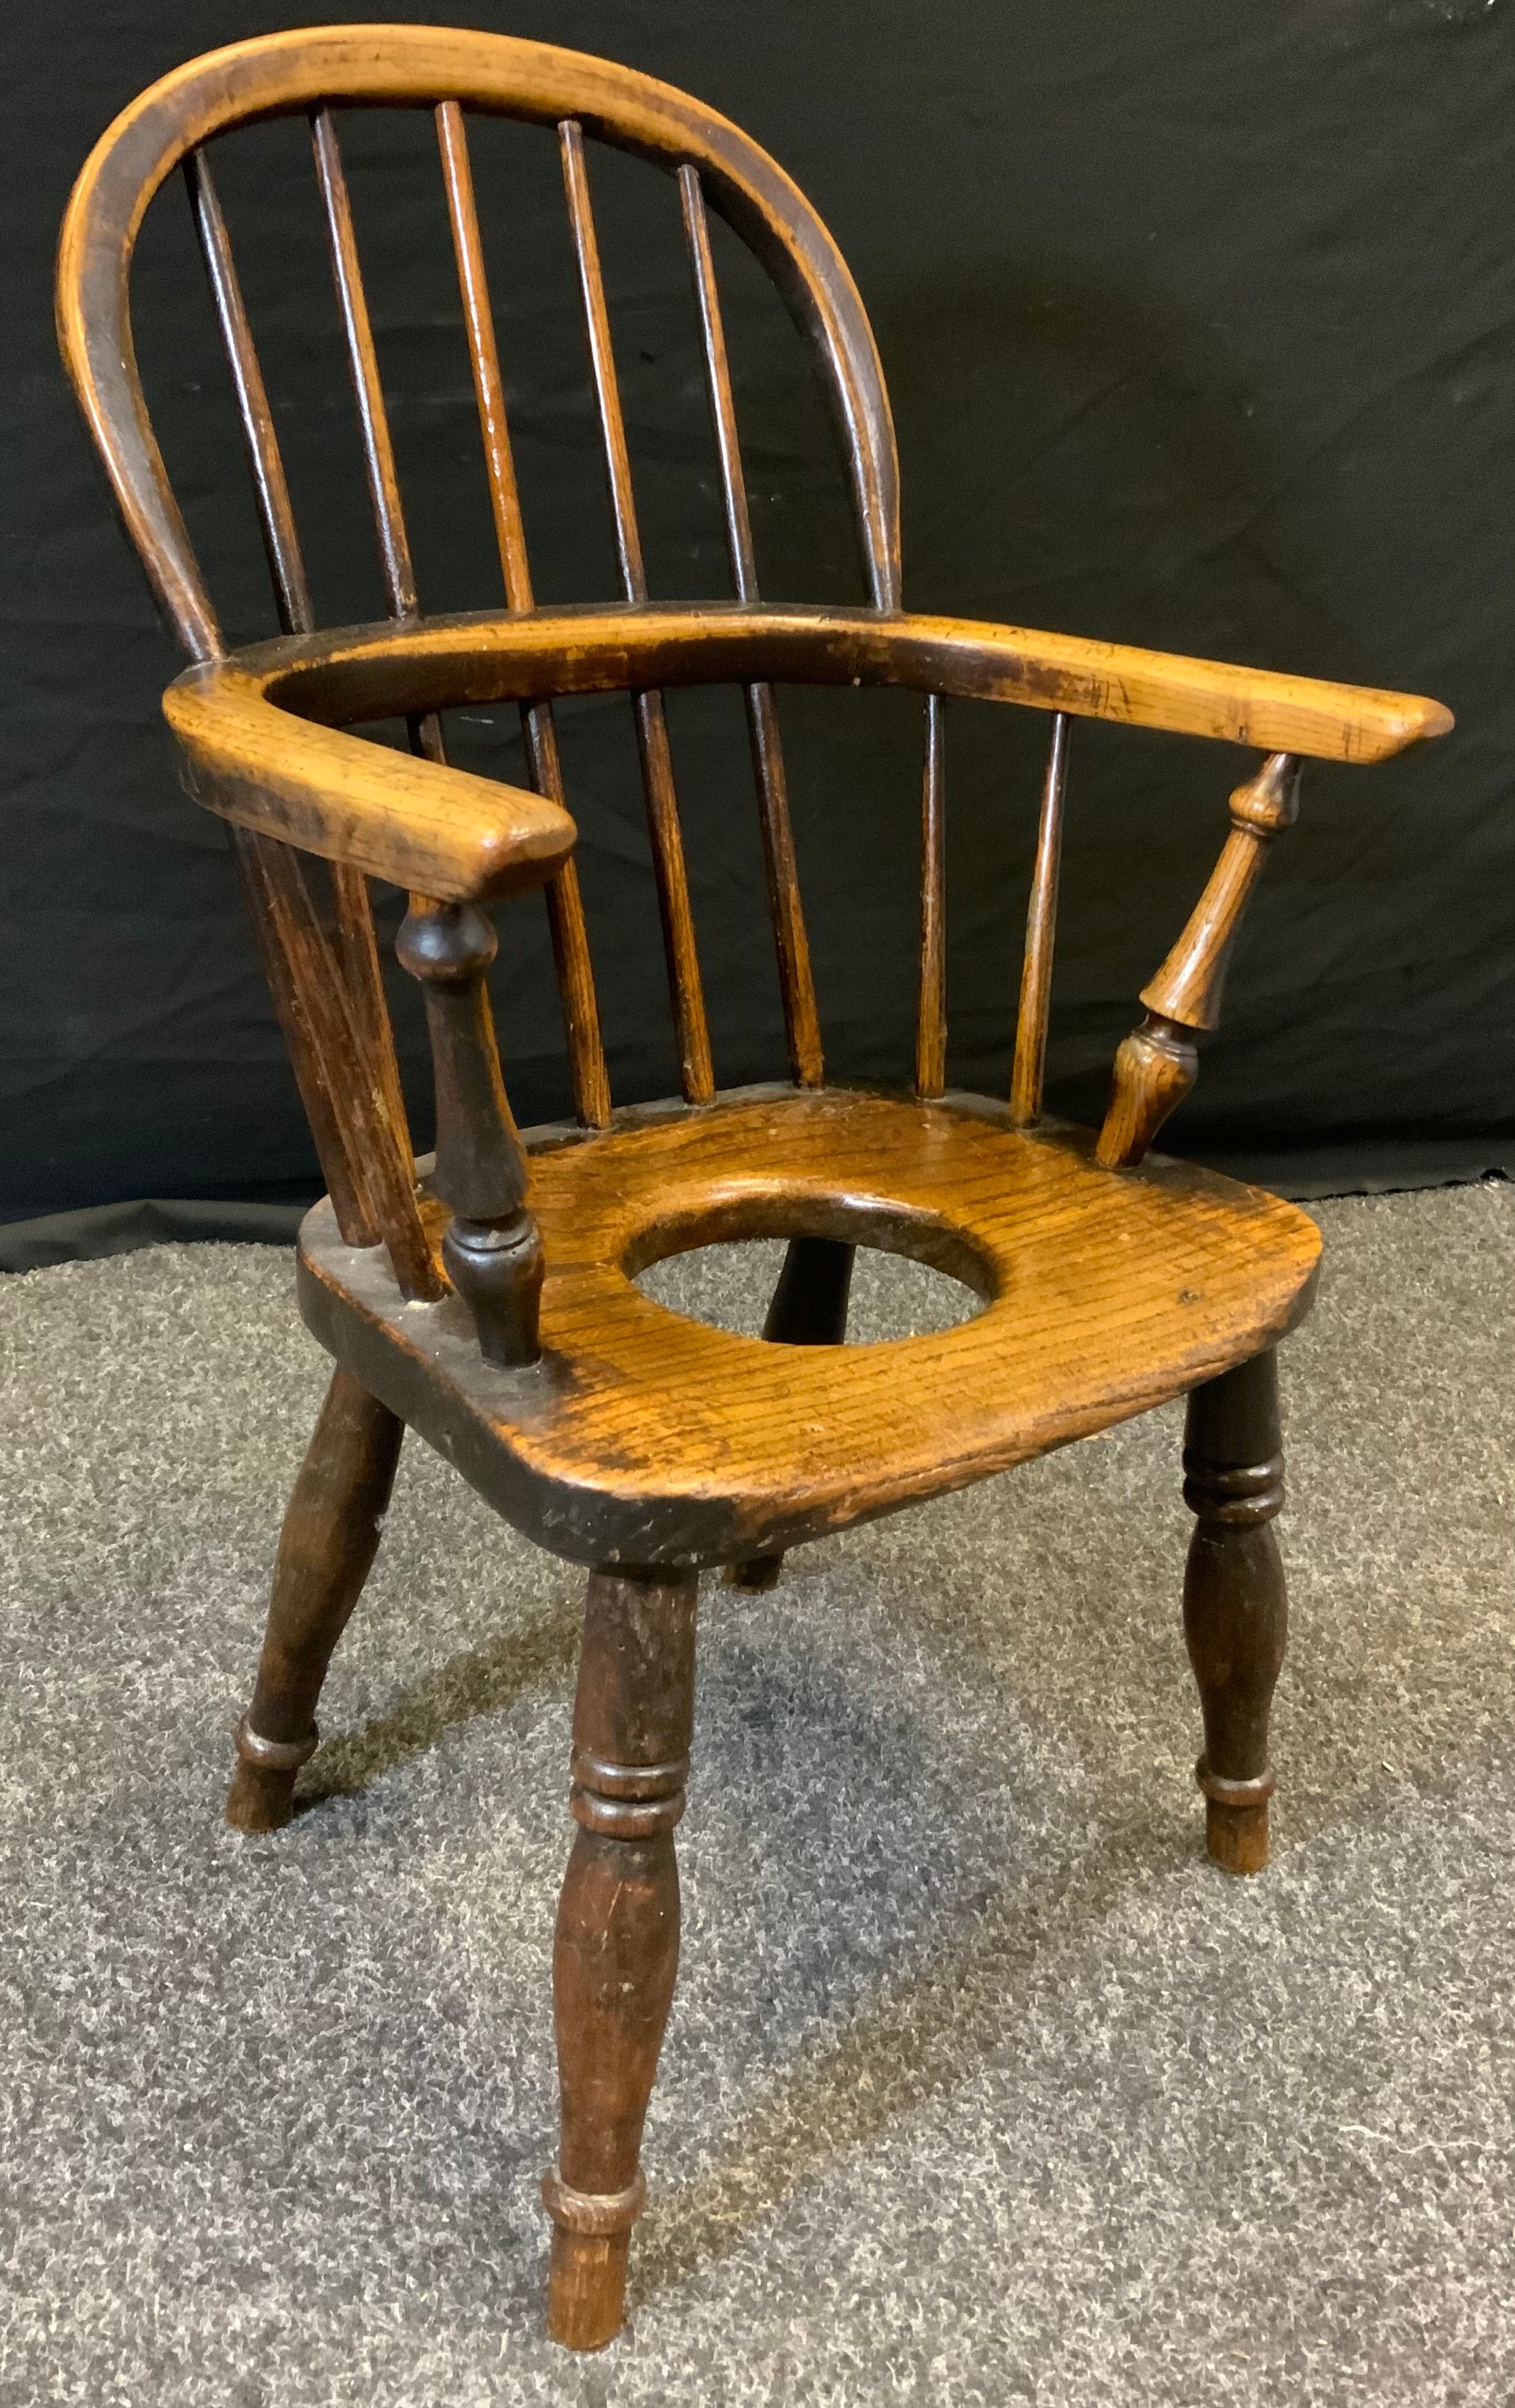 An early 19th century child's, oak and elm, commode Windsor chair, c.1800.